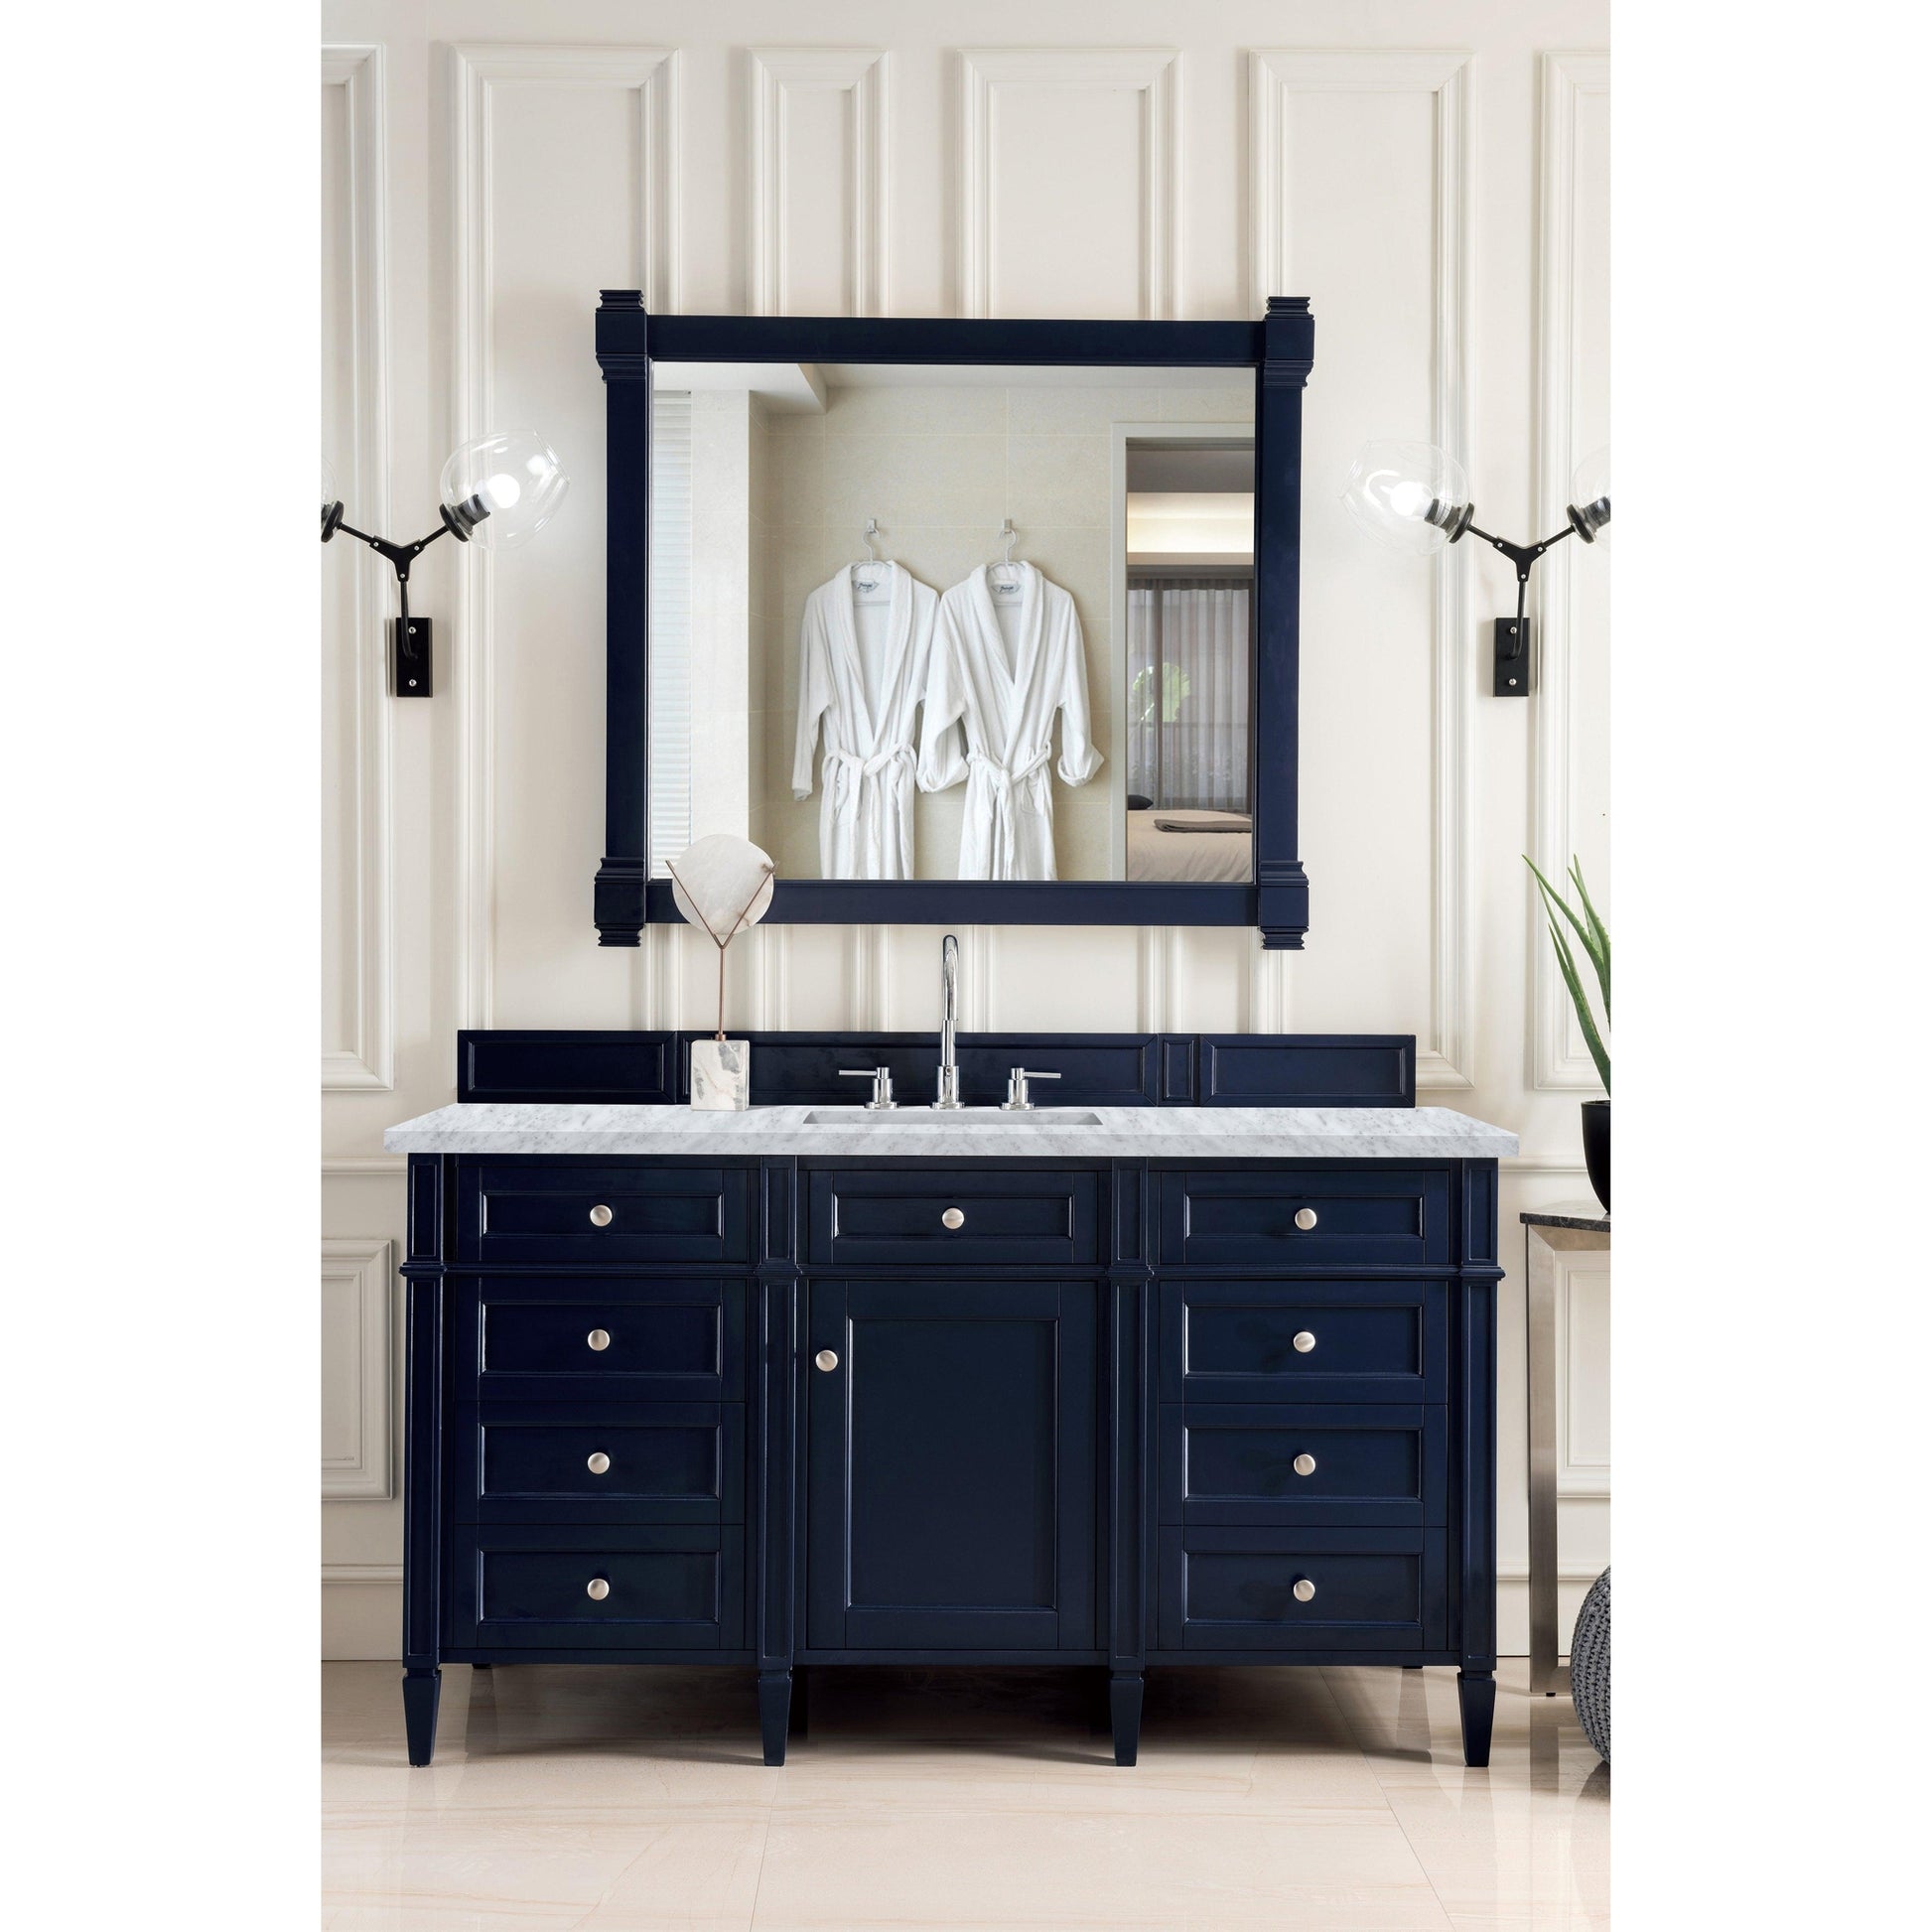 James Martin Vanities Brittany 60" Victory Blue Single Vanity With 3cm Carrara Marble Top